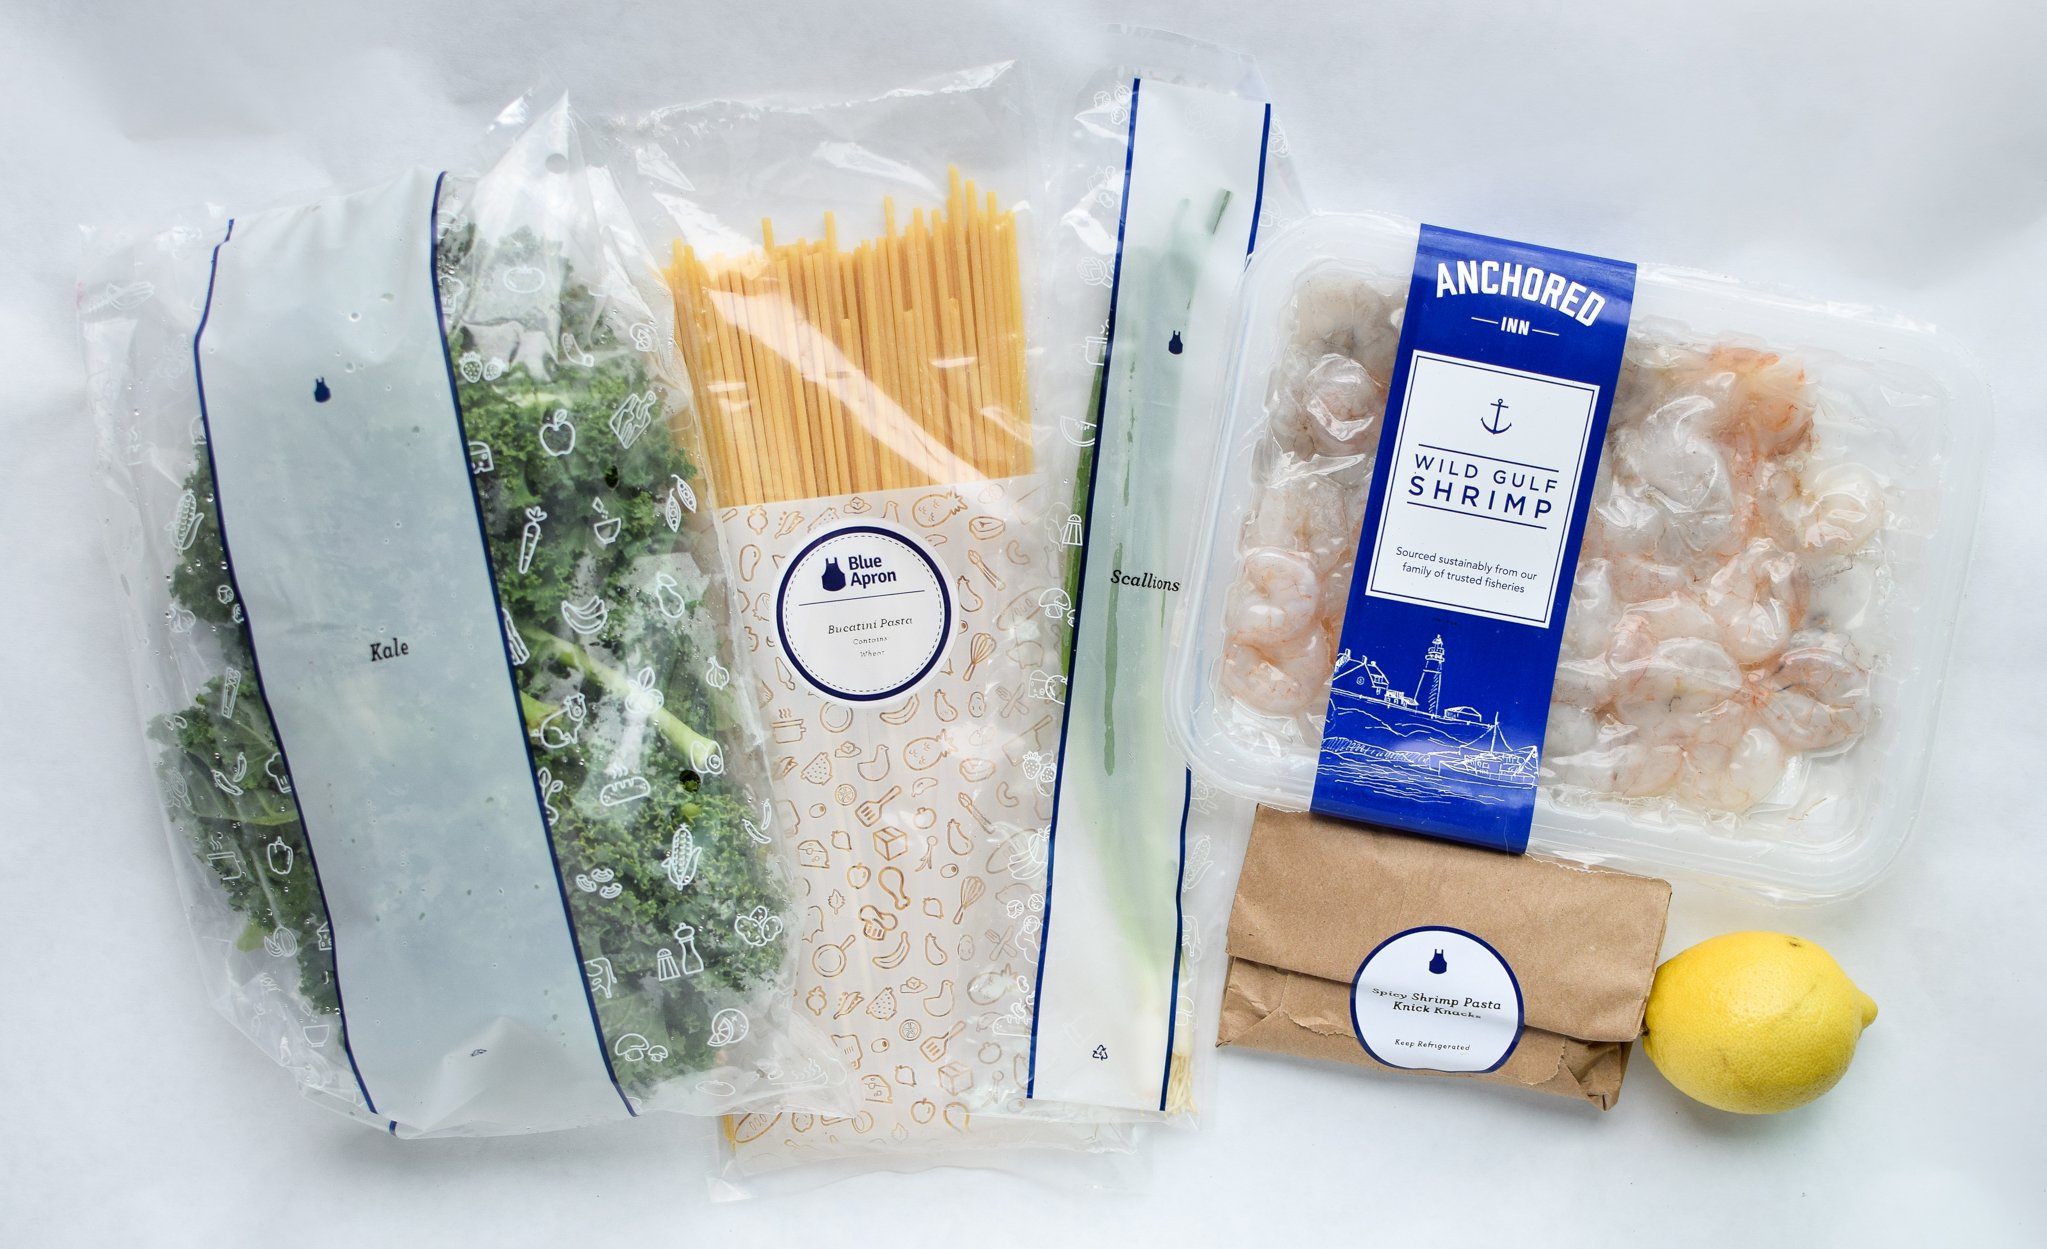 Blue Apron Meal Delivery Service Review - Pictures and discussion on the popular meal delivery service Blue Apron. - ProjectMealPlan.com